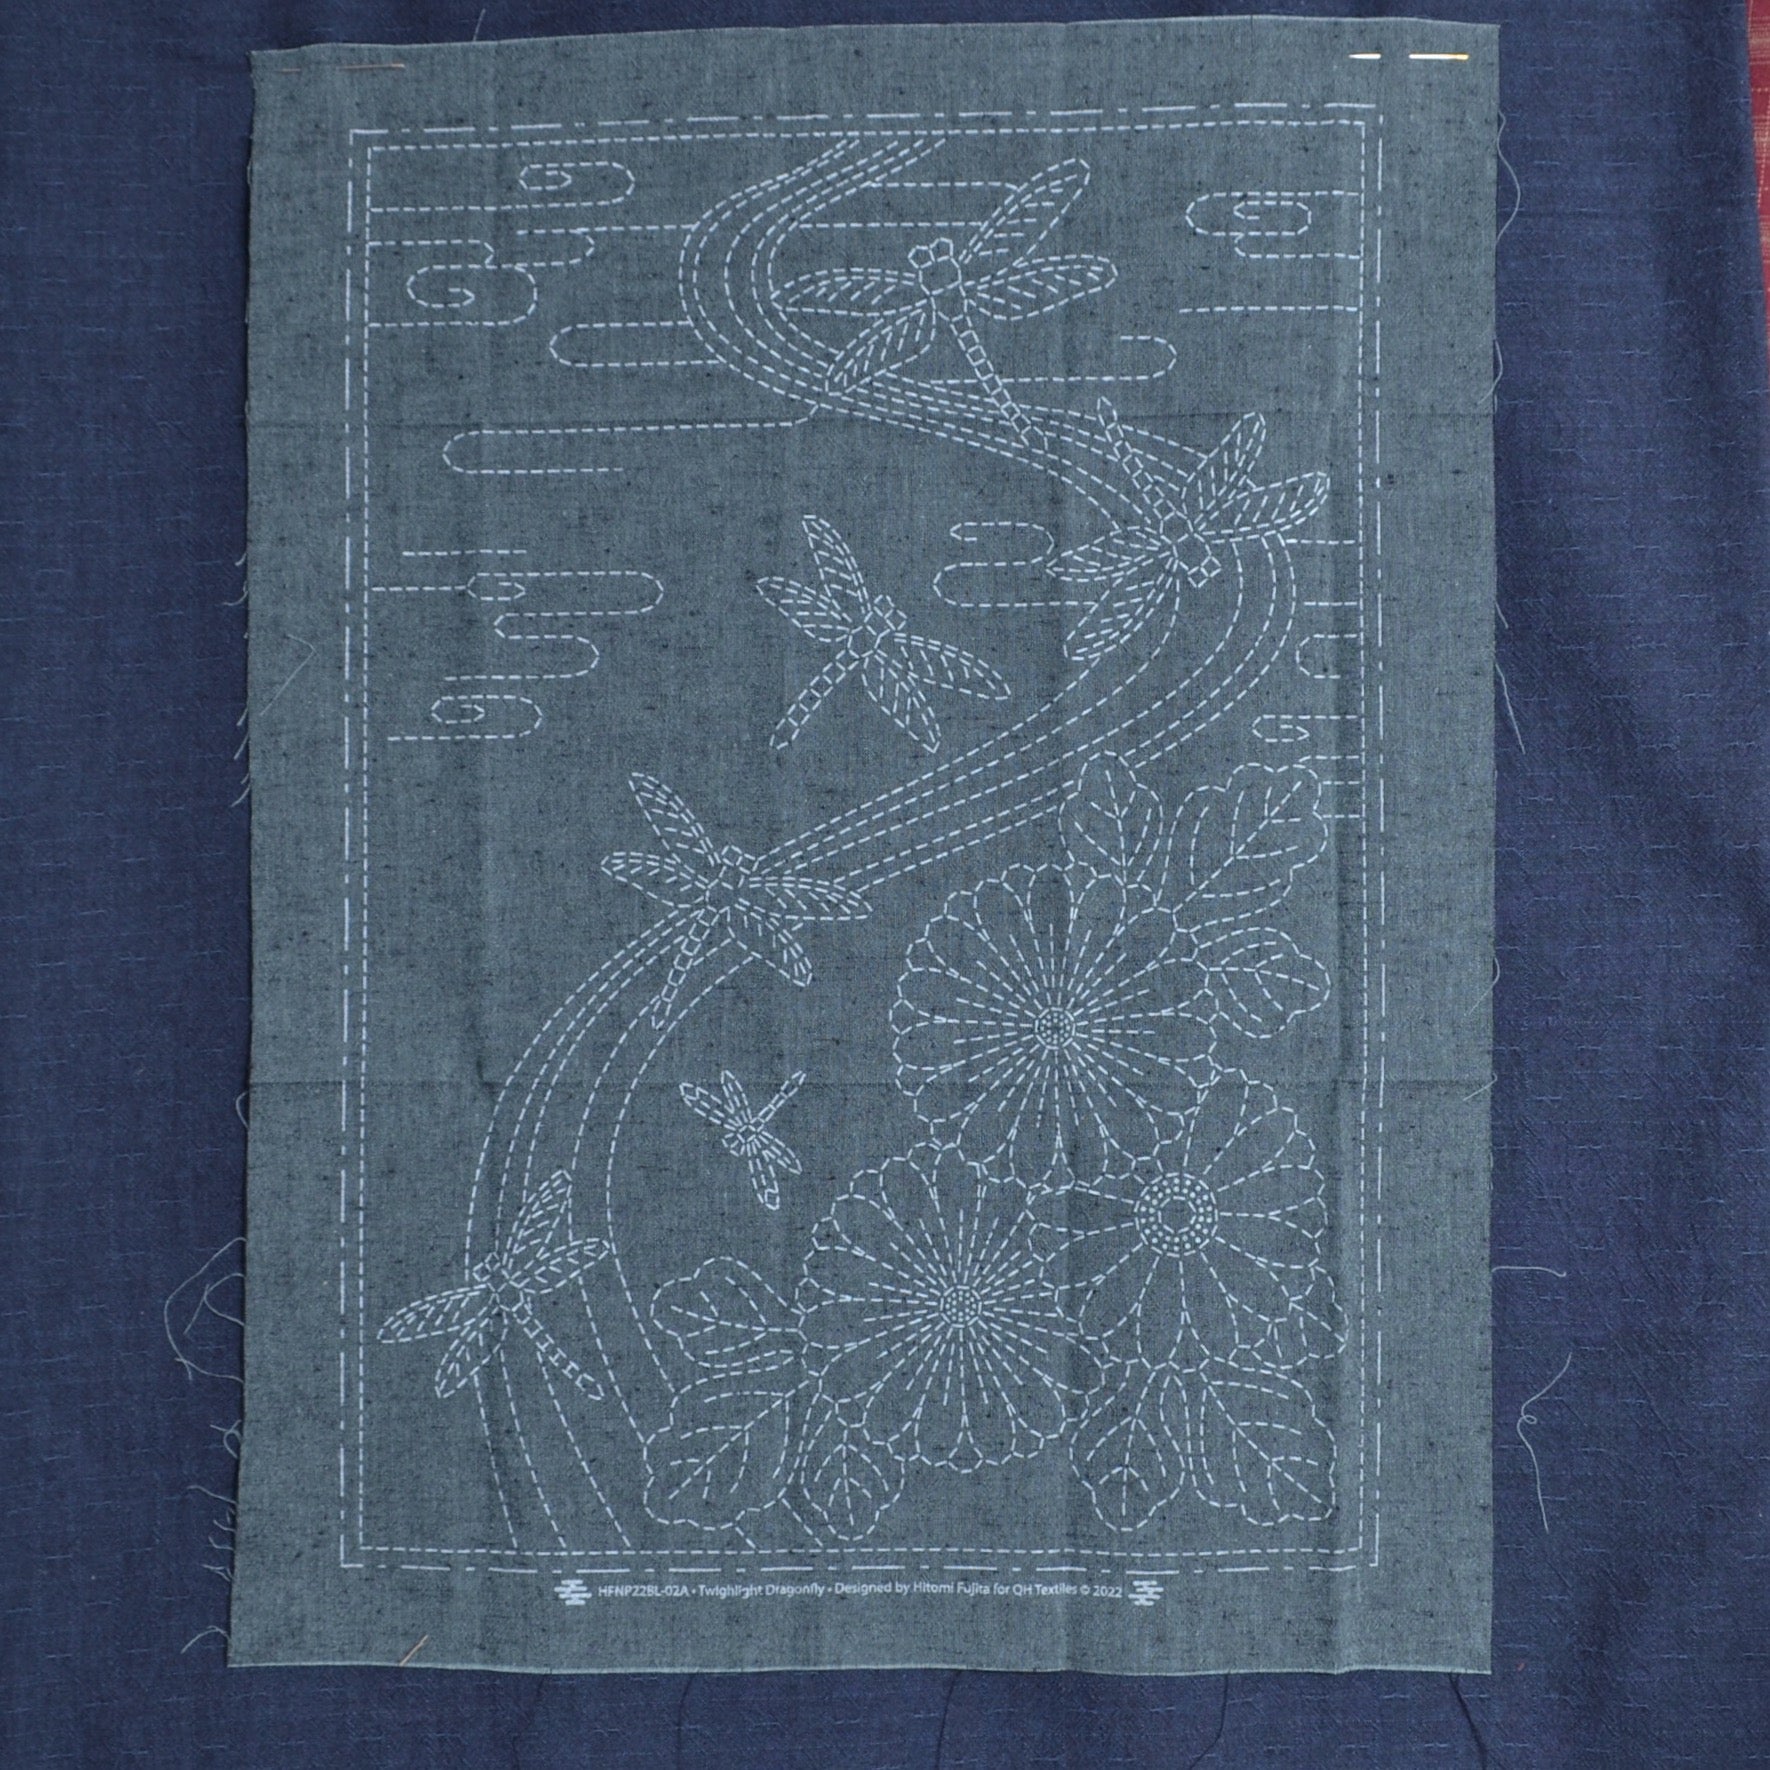 sashiko dragonfly pre-printed wash out design on blue fabric